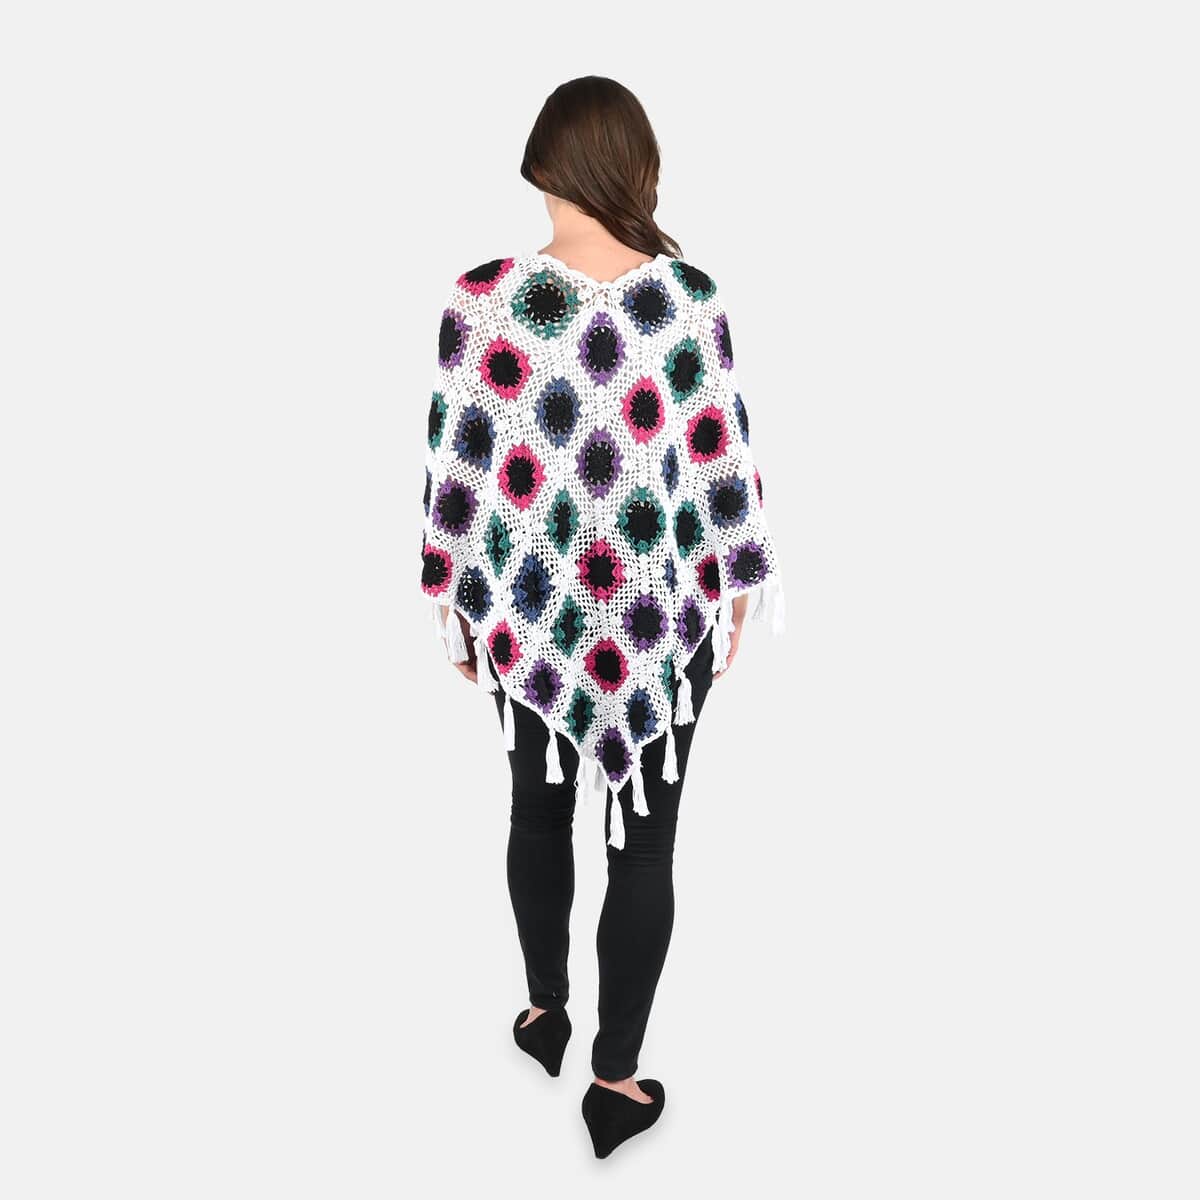 PASSAGE 100% Cotton Crochet White and Multi Color Square Poncho (One Size) image number 1